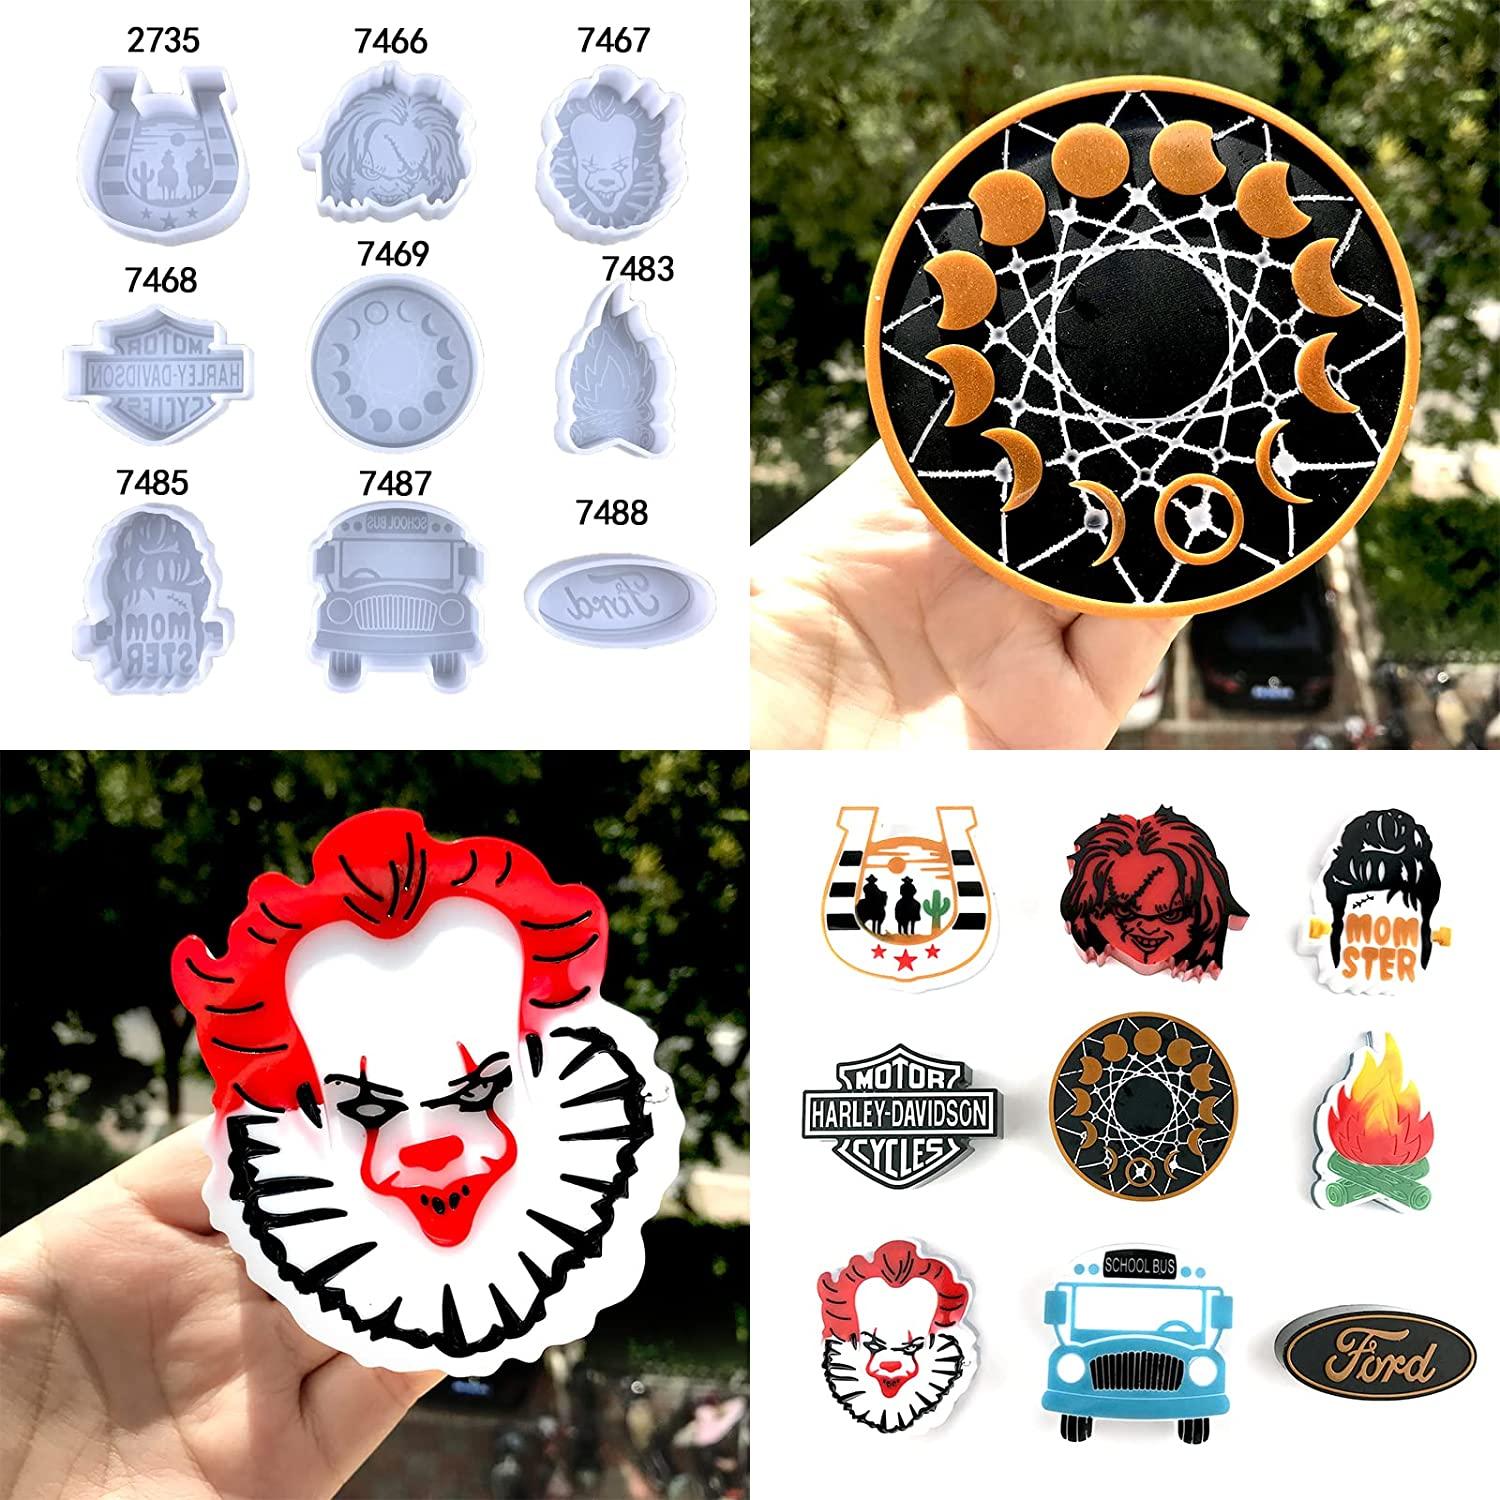 Motor cycles Freshie Molds,Silicone Molds for Freshies,Car Freshie Molds,Silicone  Epoxy Resin Molds for Aroma Beads,Soap Mold,Candle Molds,Pendant Mold  (Motor cycles)